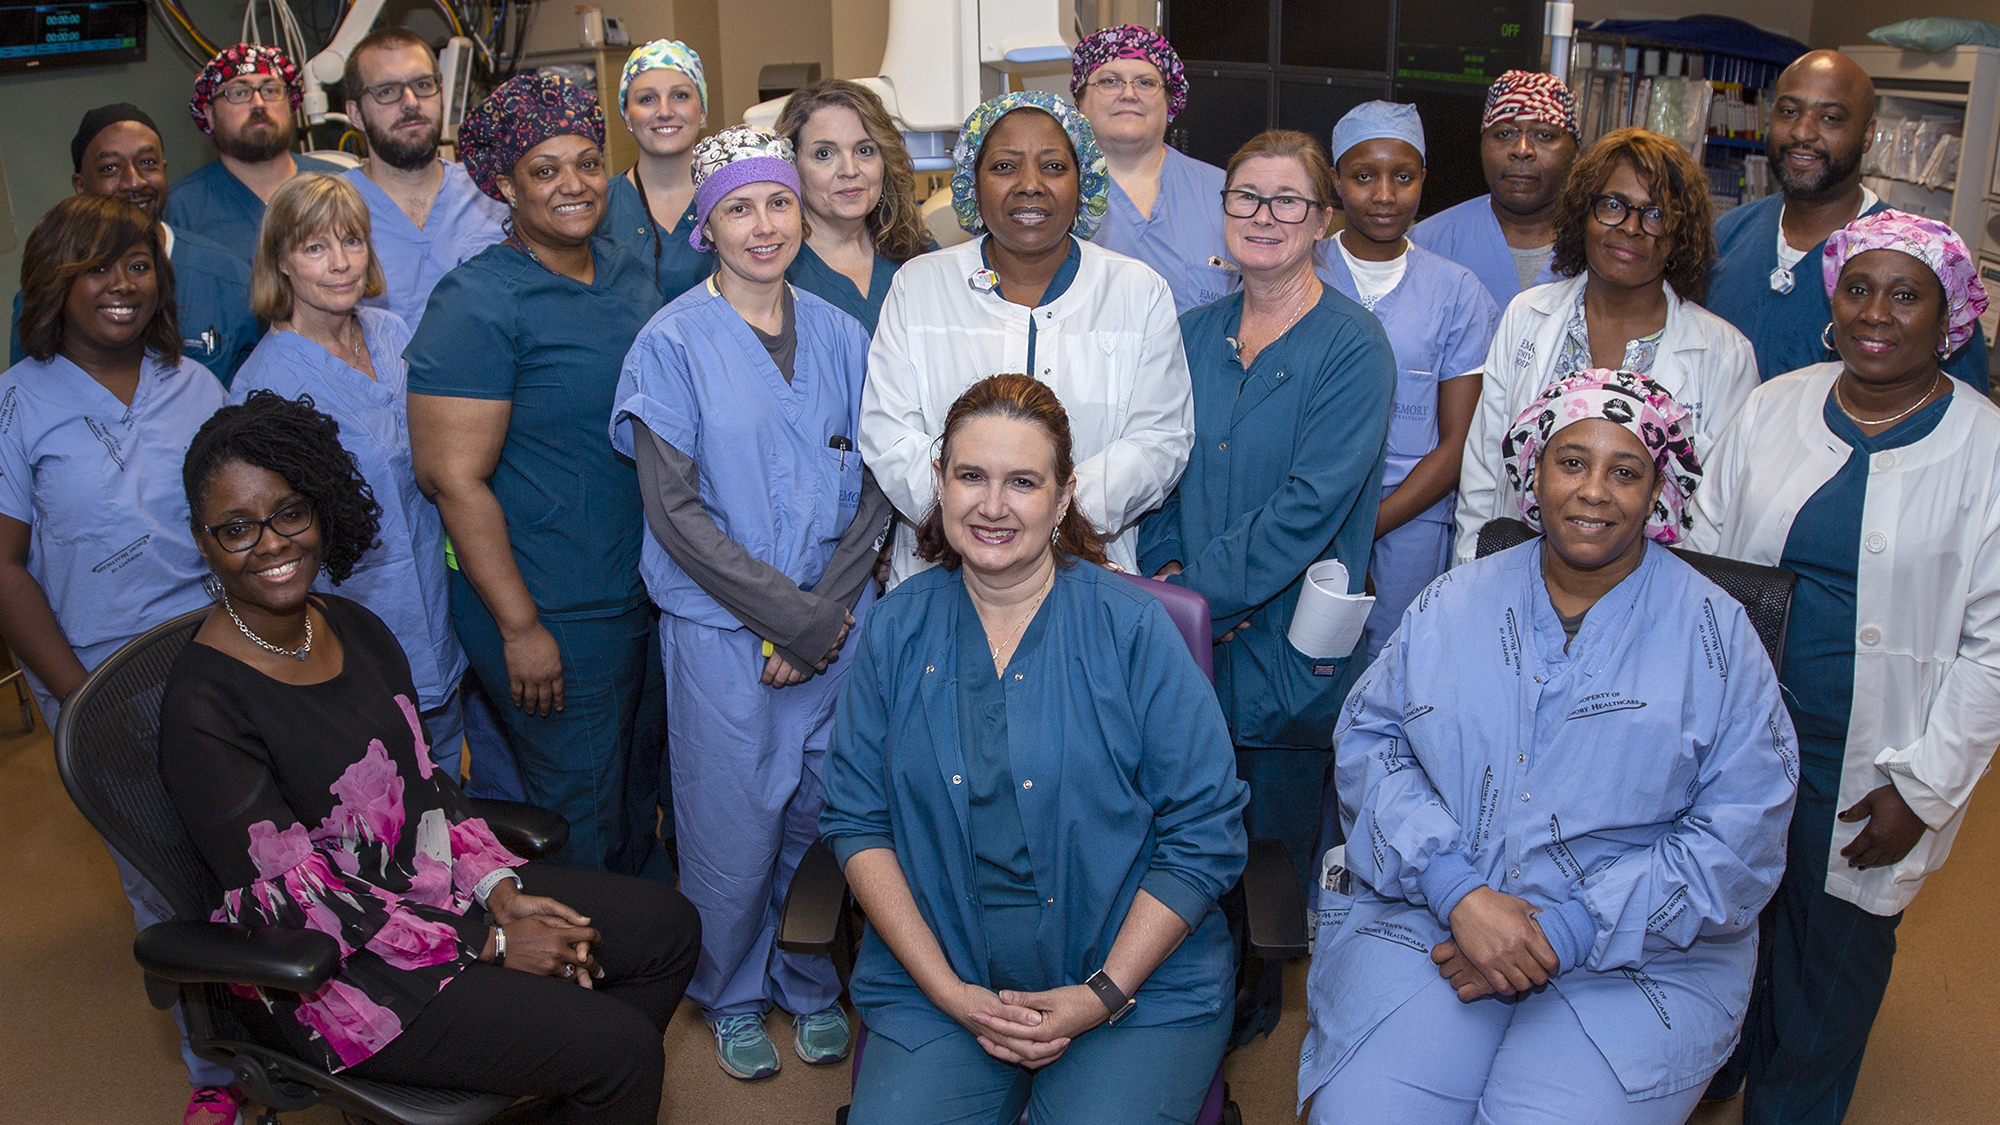 group of men and women wearing colorful surgical hats and blue scrubs